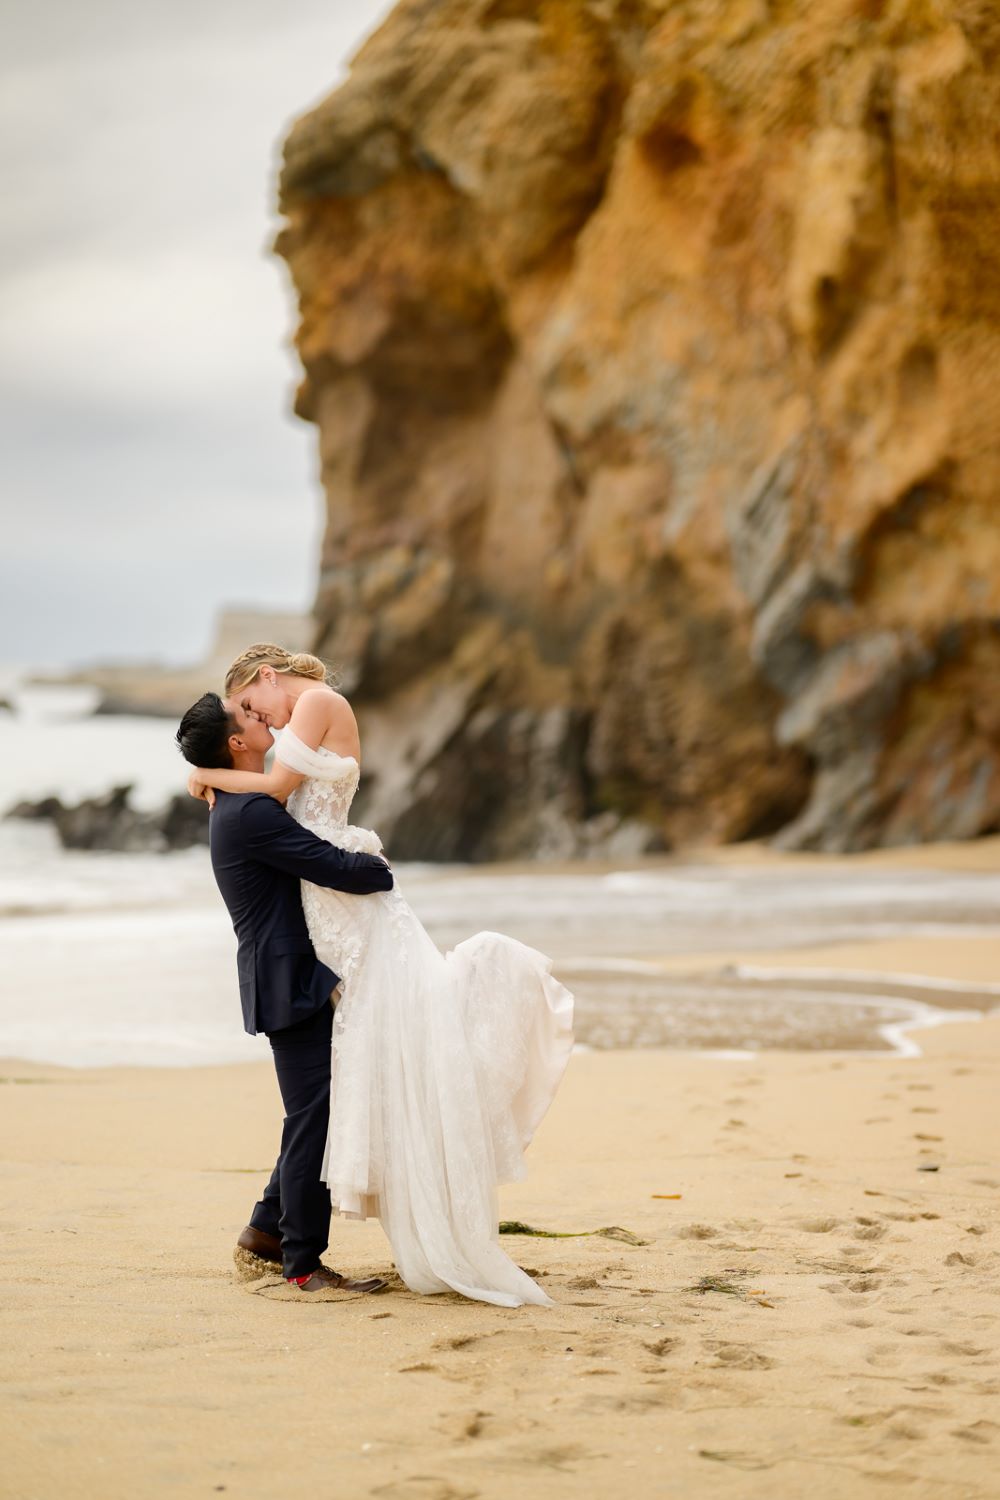 A couple on a beach after purchasing an elopement package in California